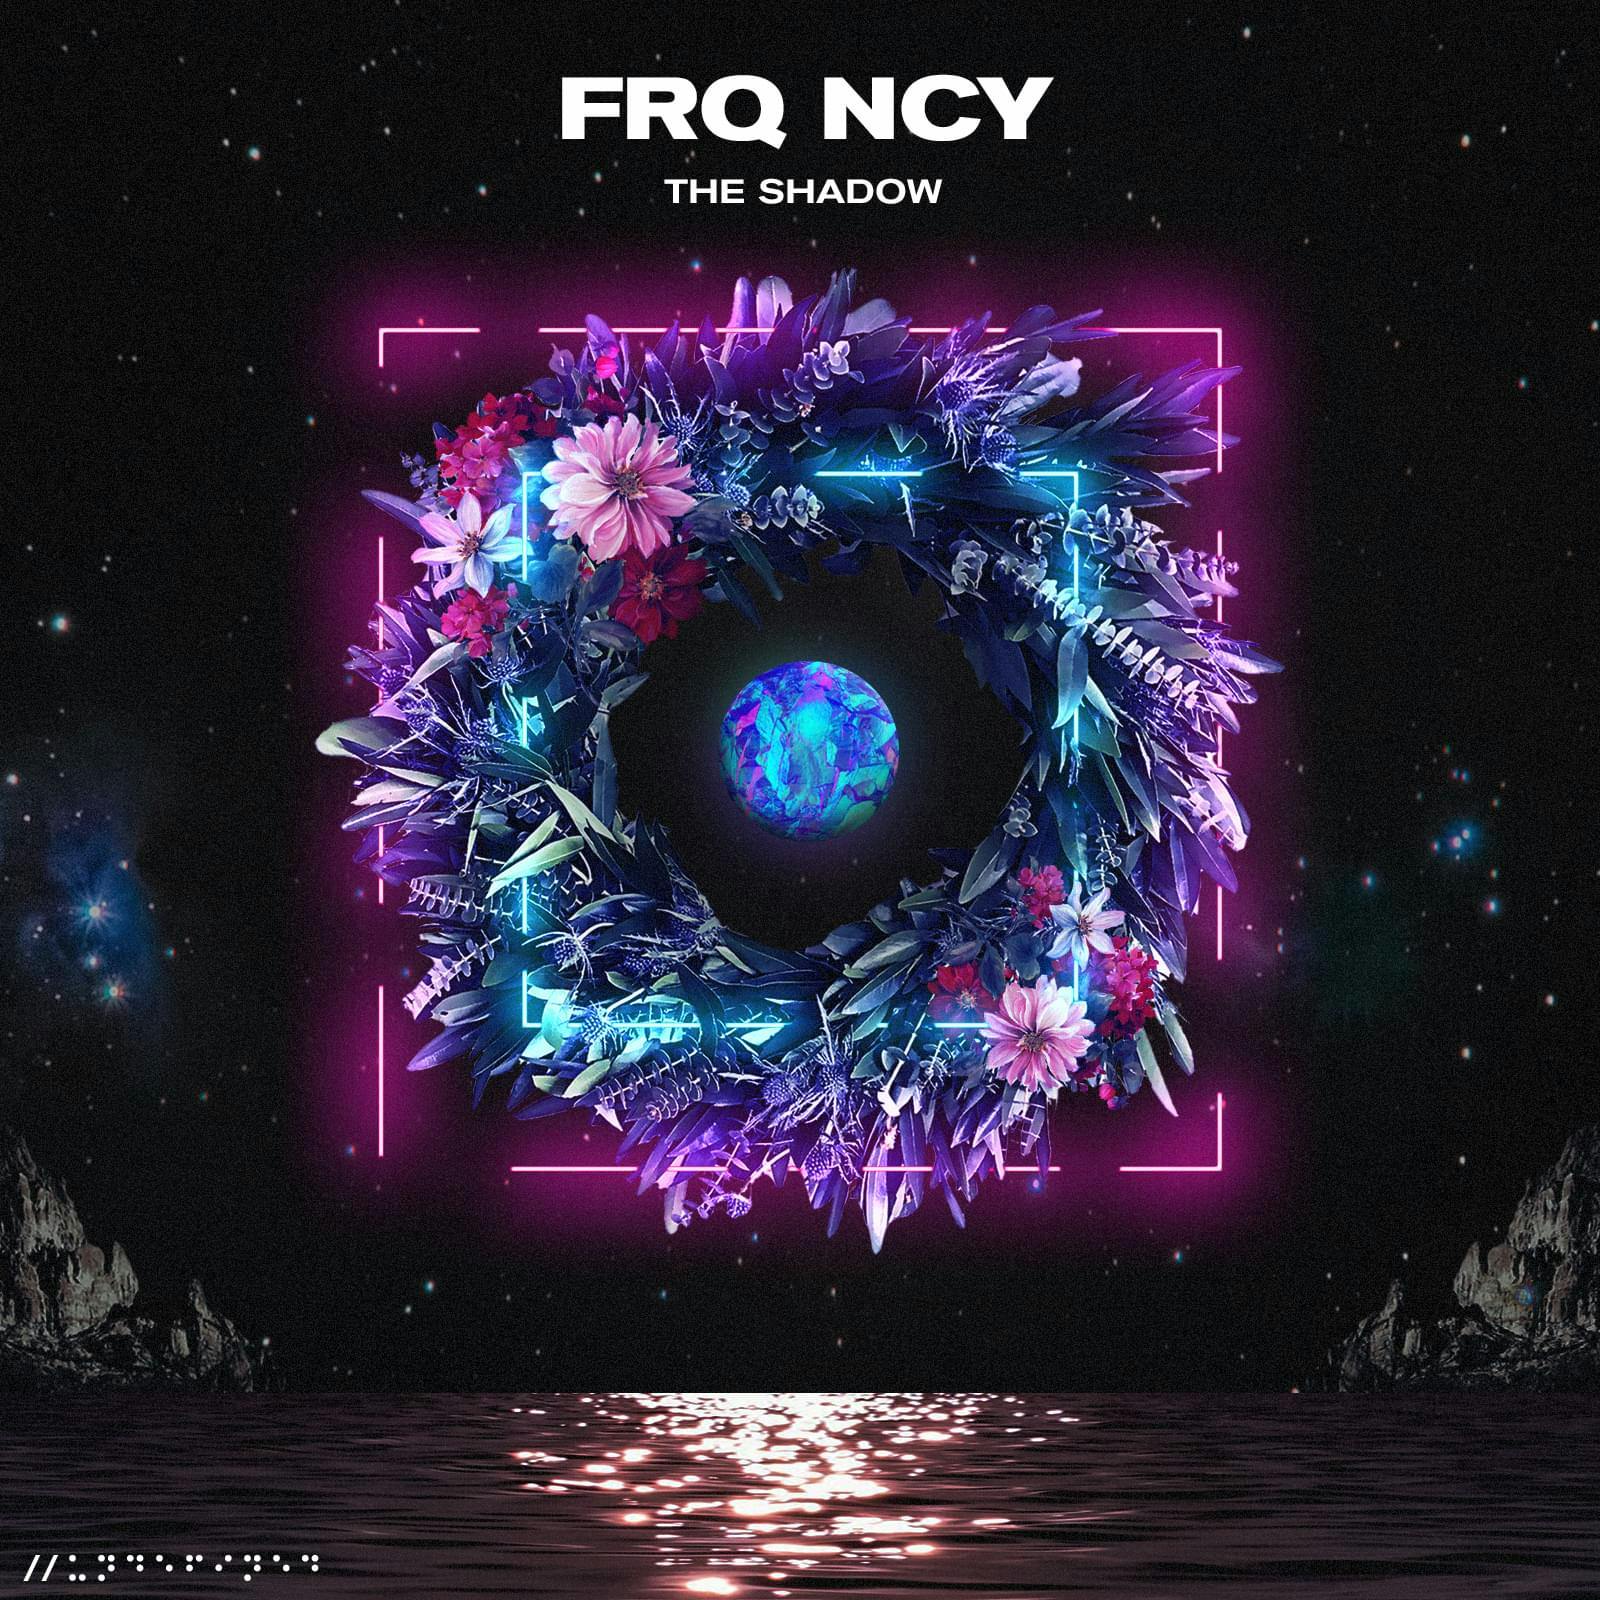 Cover art for FRQ NCY's song: The Shadow